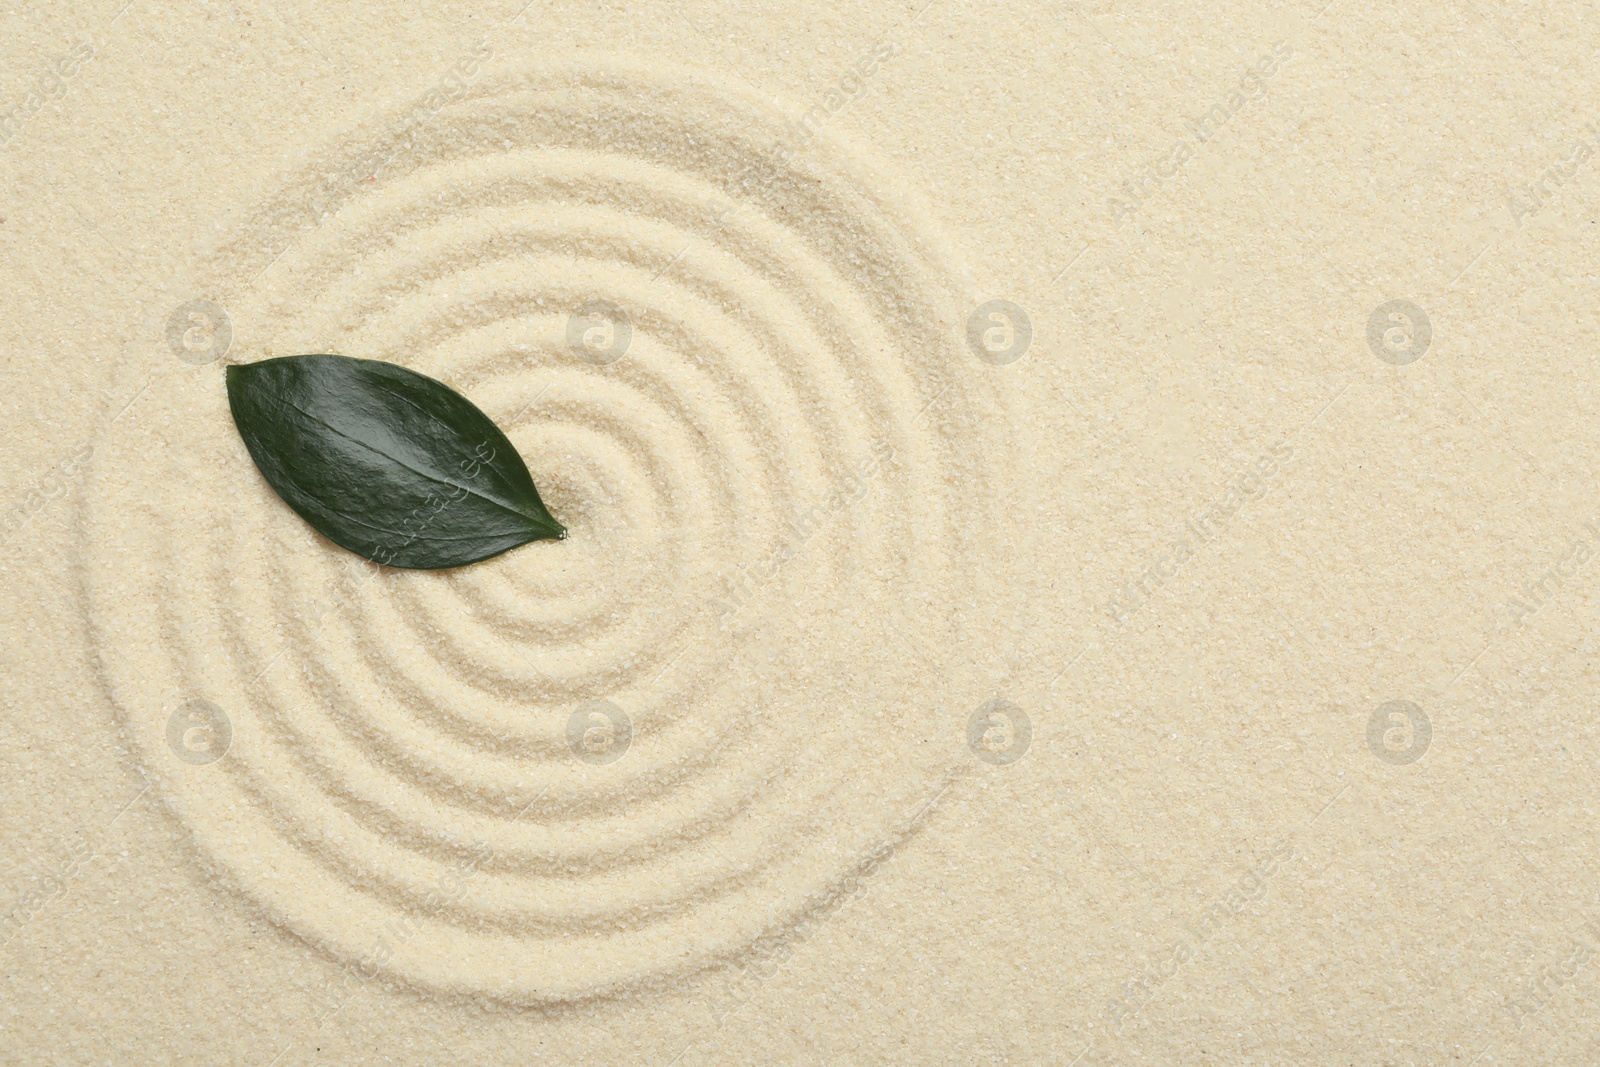 Photo of Zen rock garden. Circle pattern and green leaf on beige sand, top view